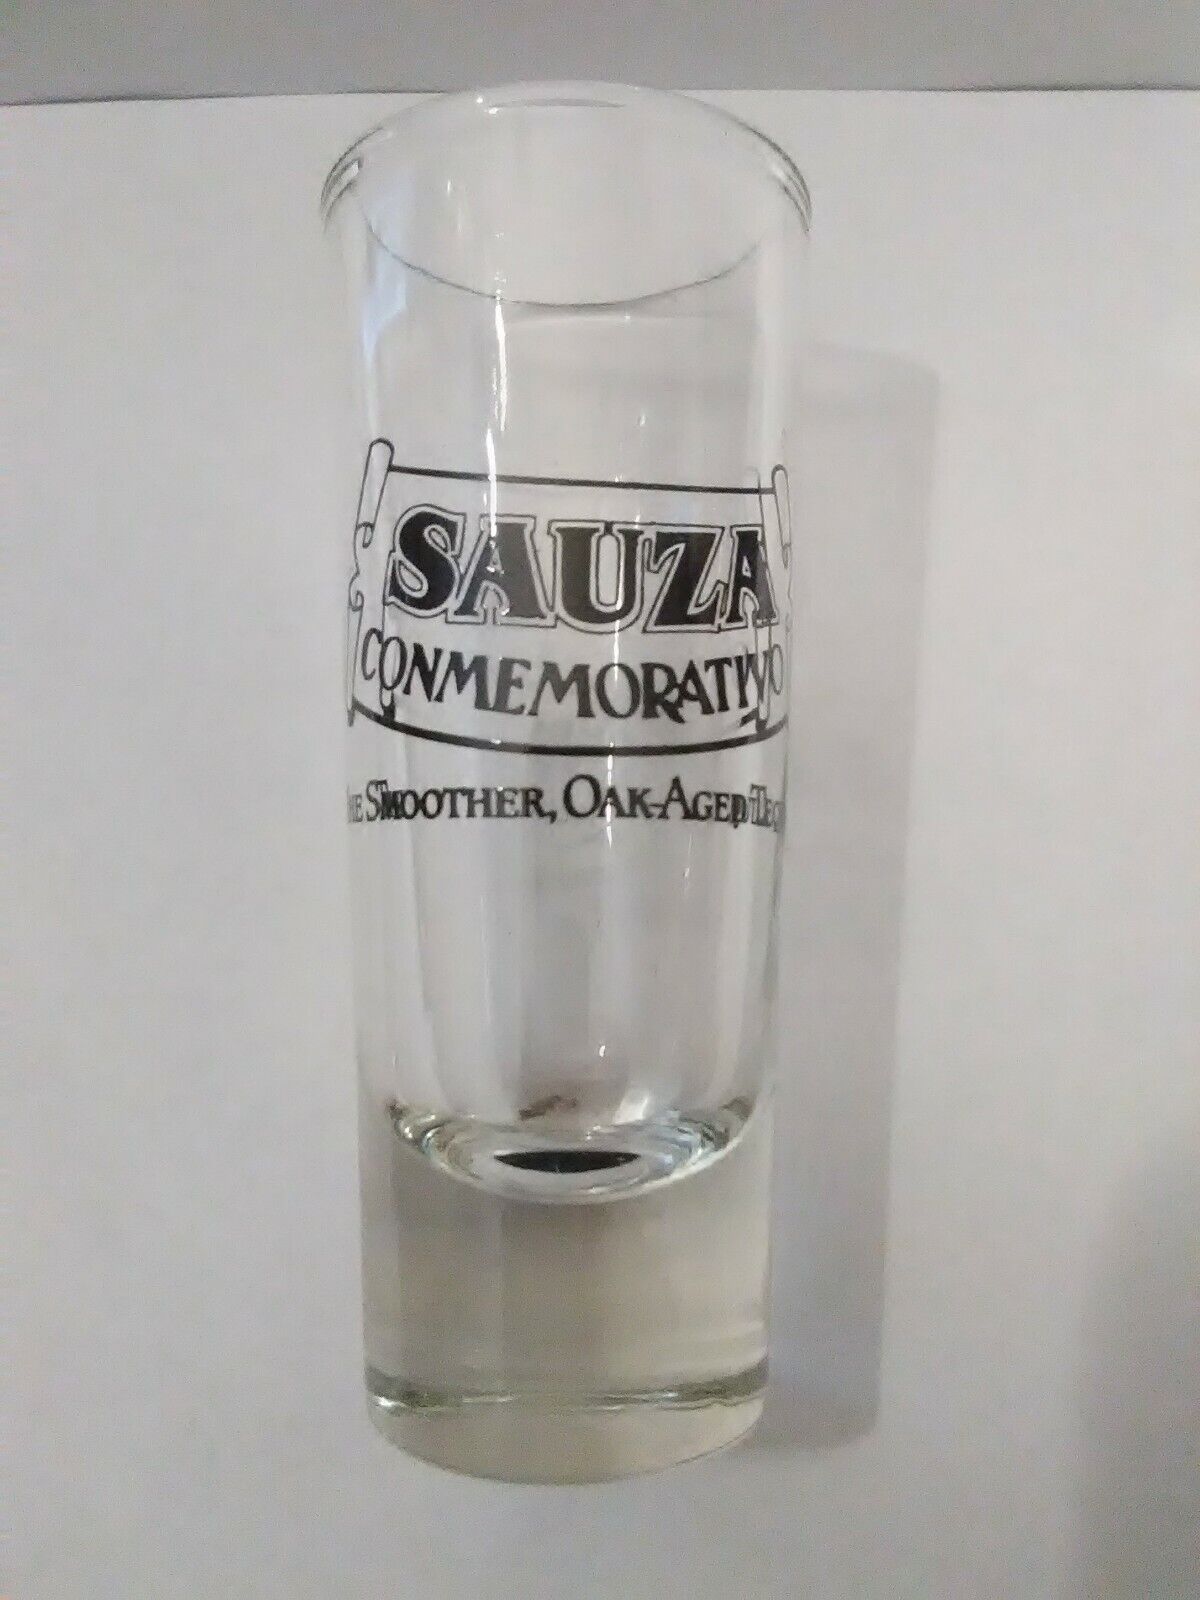 SAUZA COMMEMORATIVO OAK AGED LOGO TEQUILA SHOT GLASS GREAT FOR ANY COLLECTION